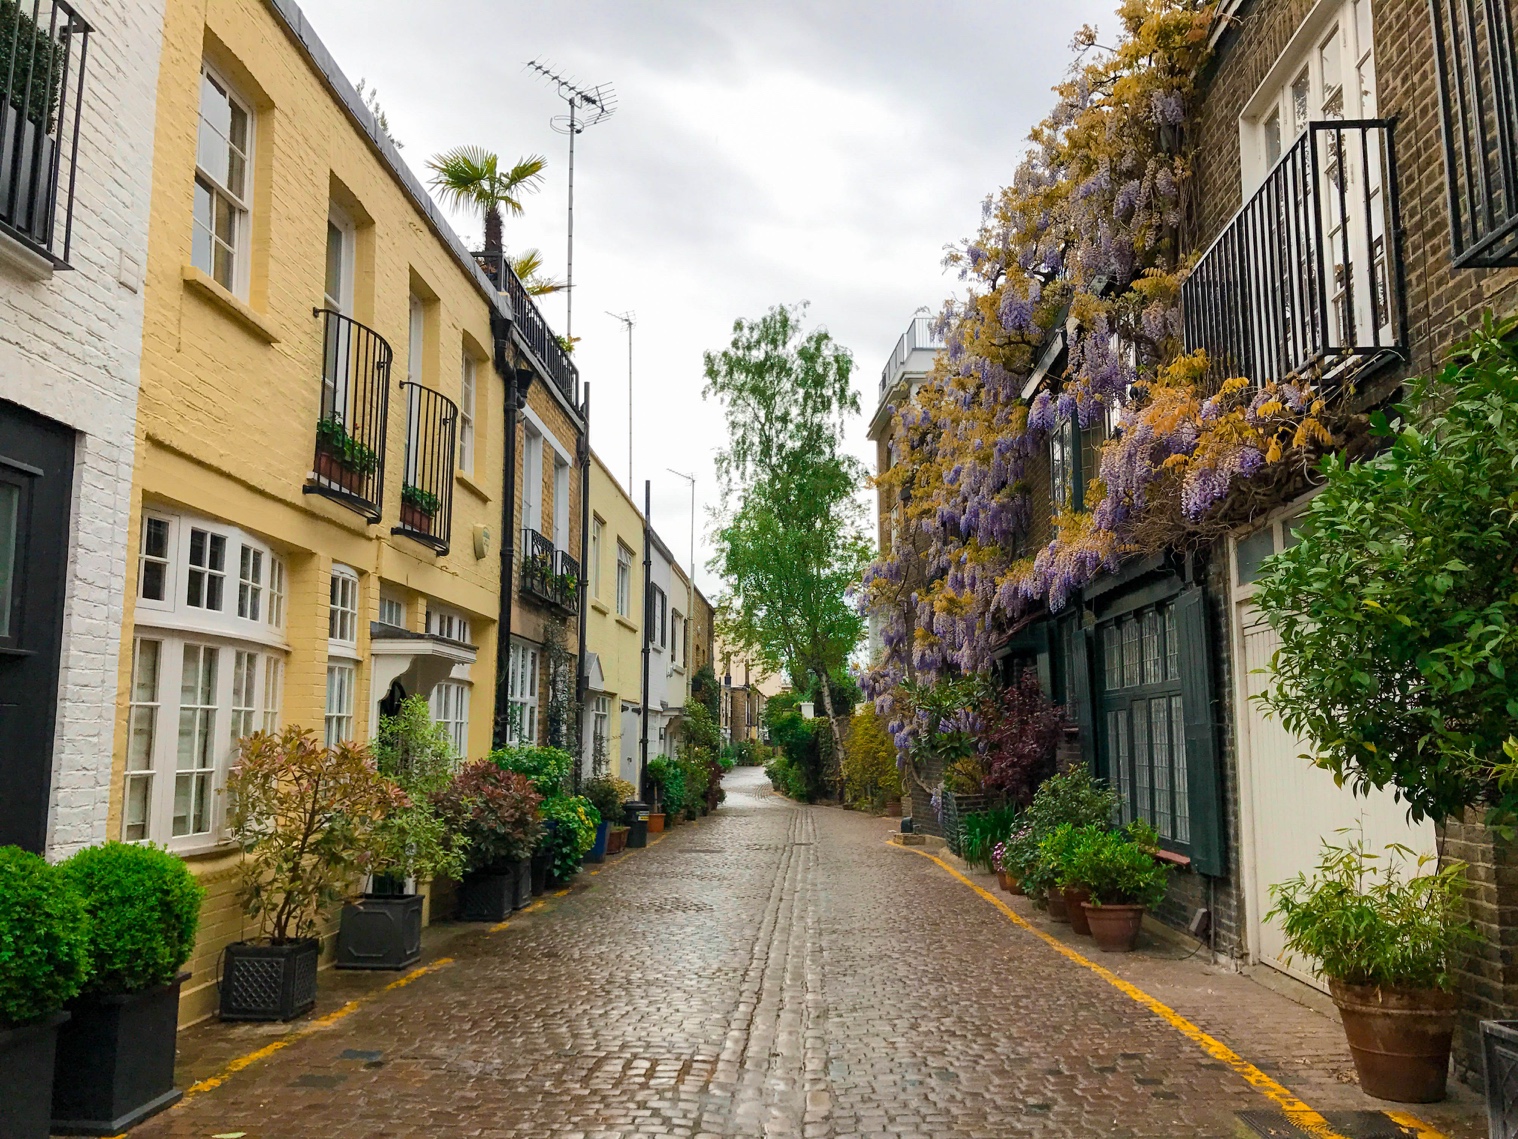 Mews in London, England